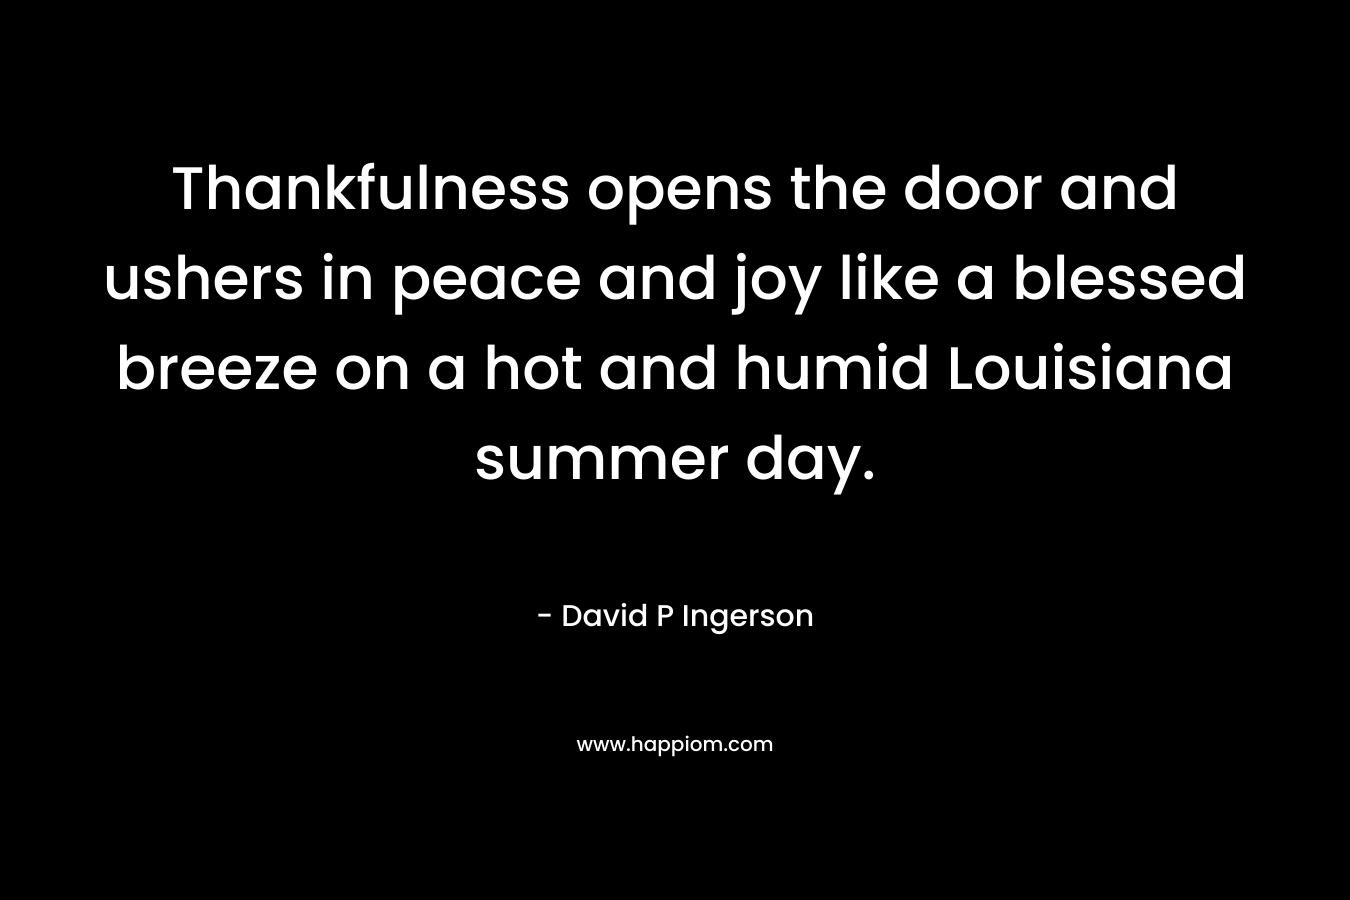 Thankfulness opens the door and ushers in peace and joy like a blessed breeze on a hot and humid Louisiana summer day. – David P Ingerson